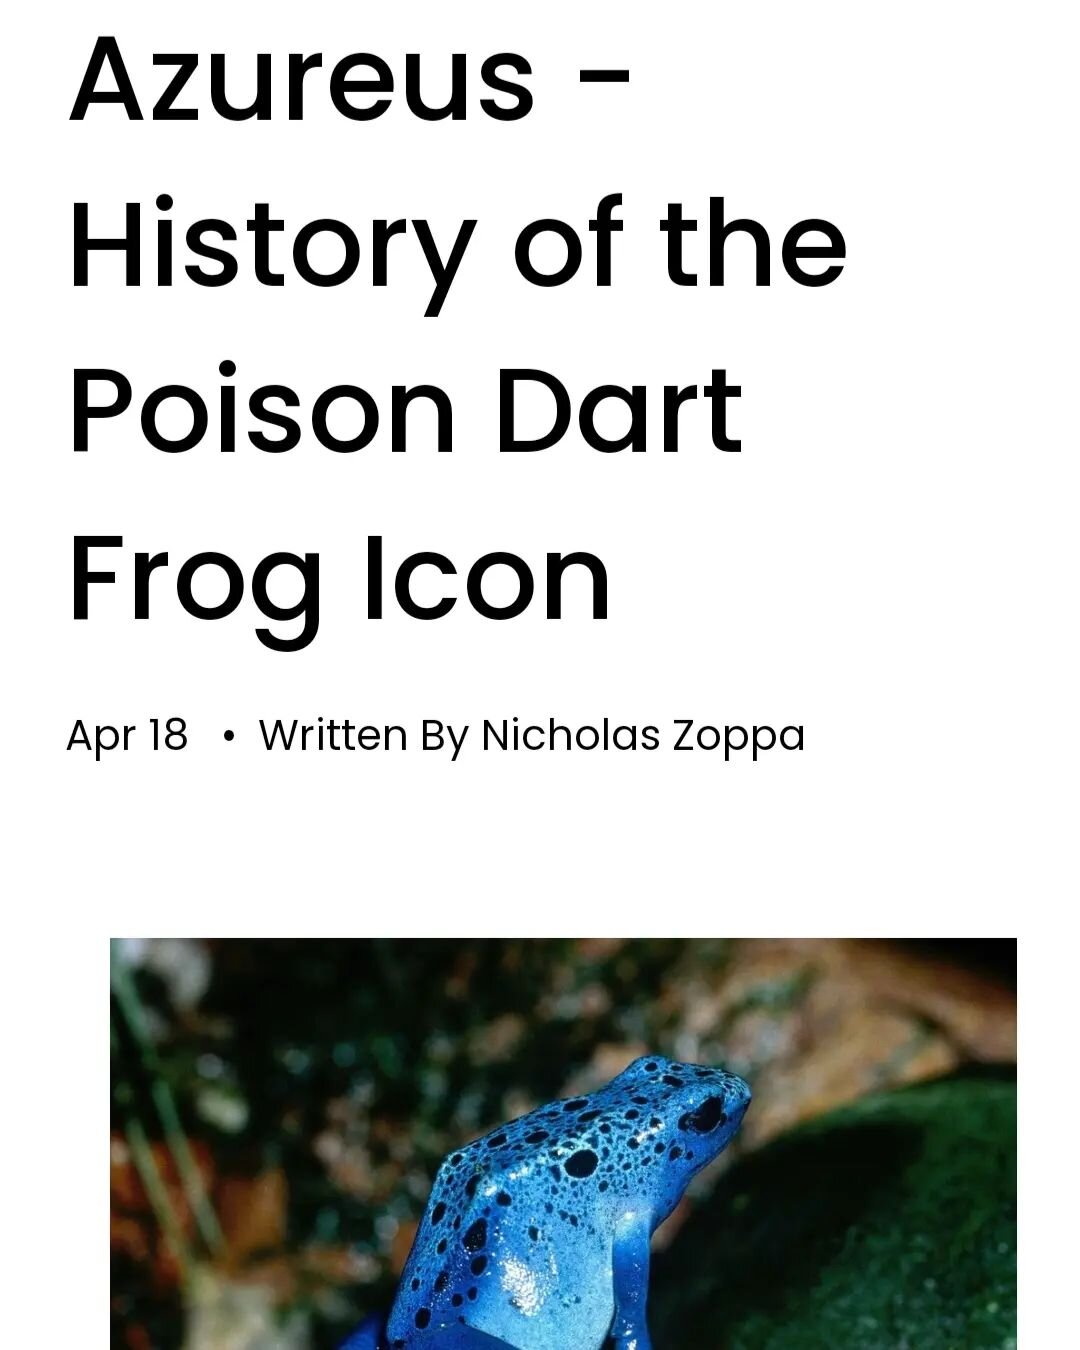 To all my fellow Azureus lovers... 

Ever wonder how these beautiful blue frogs called Azureus got here in the first place? 

Did you know how long they've been in the hobby? 

Well this article is sure to clear up a lot you may have wondered about. 